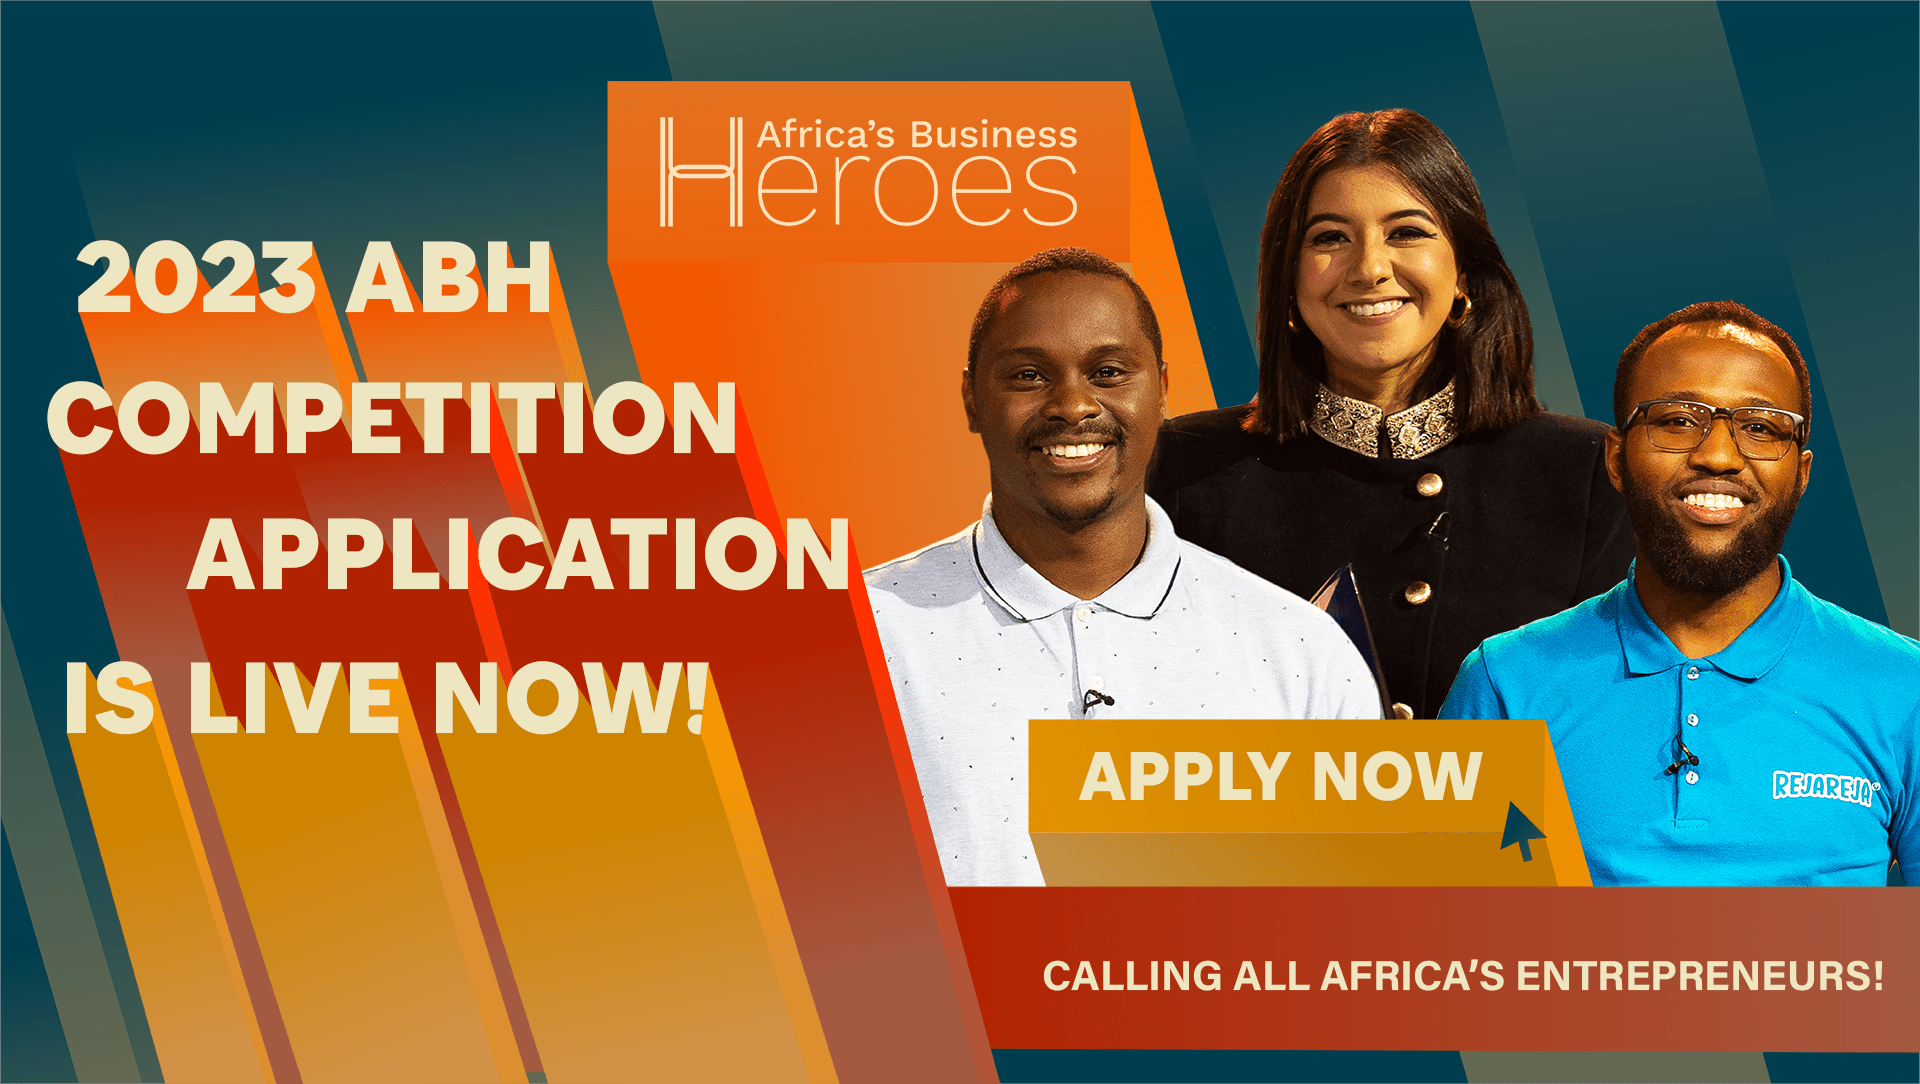 Africa’s Business Heroes to Support Entrepreneurs With $1.5 Million